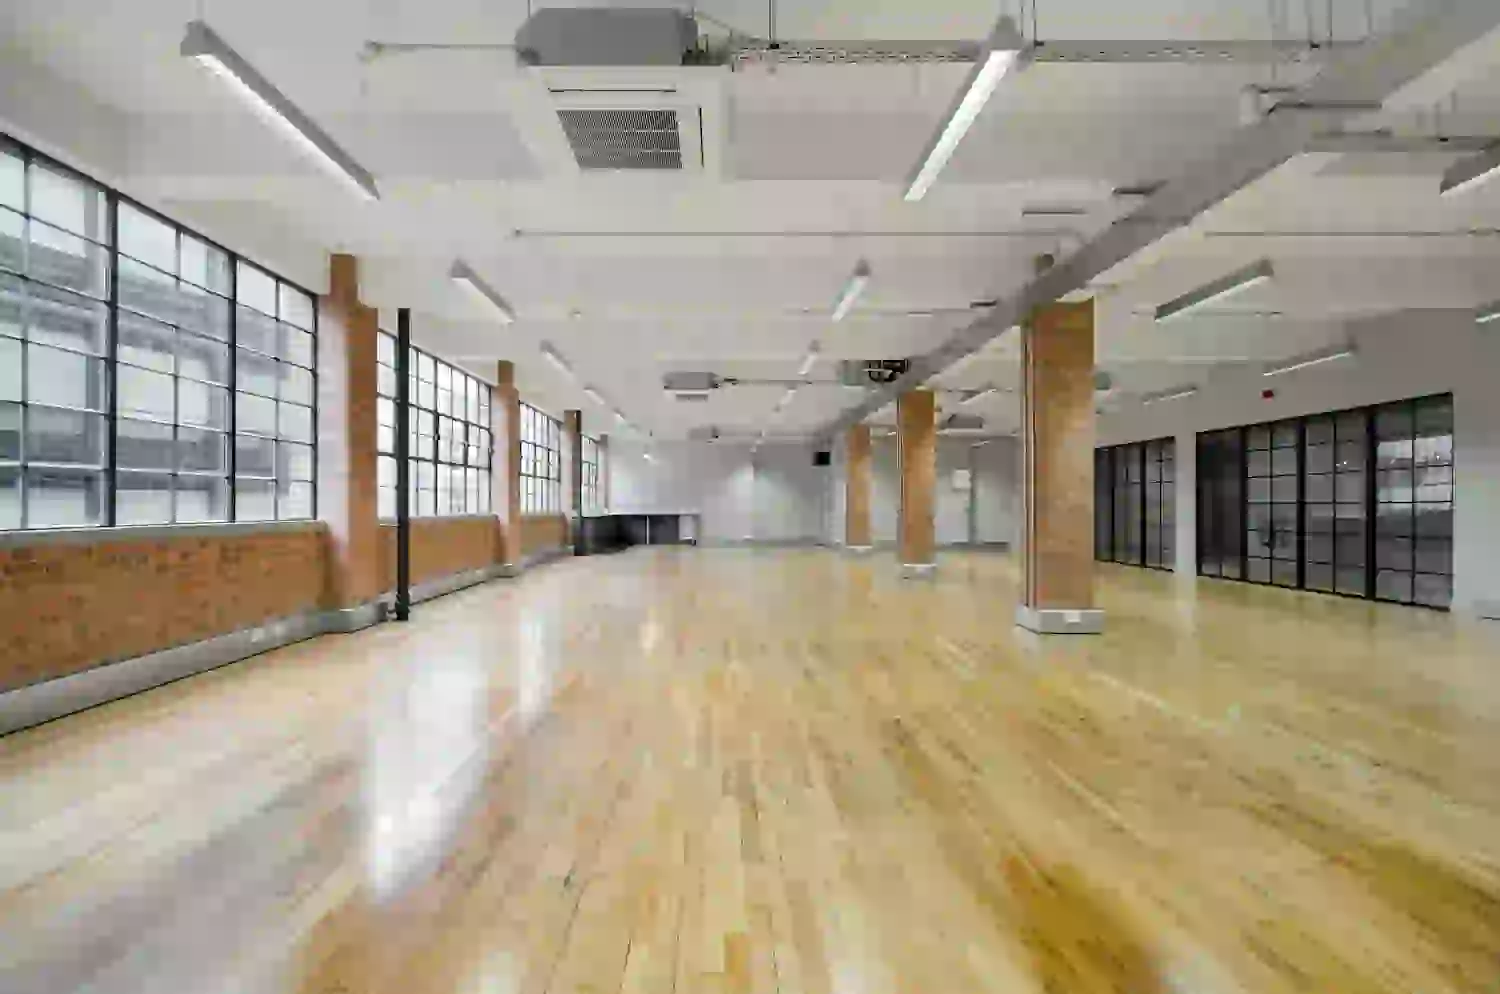 Office space to rent at Metal Box Factory, 30 Great Guildford Street, Borough, London, unit GG.213-6, 2623 sq ft (243 sq m).